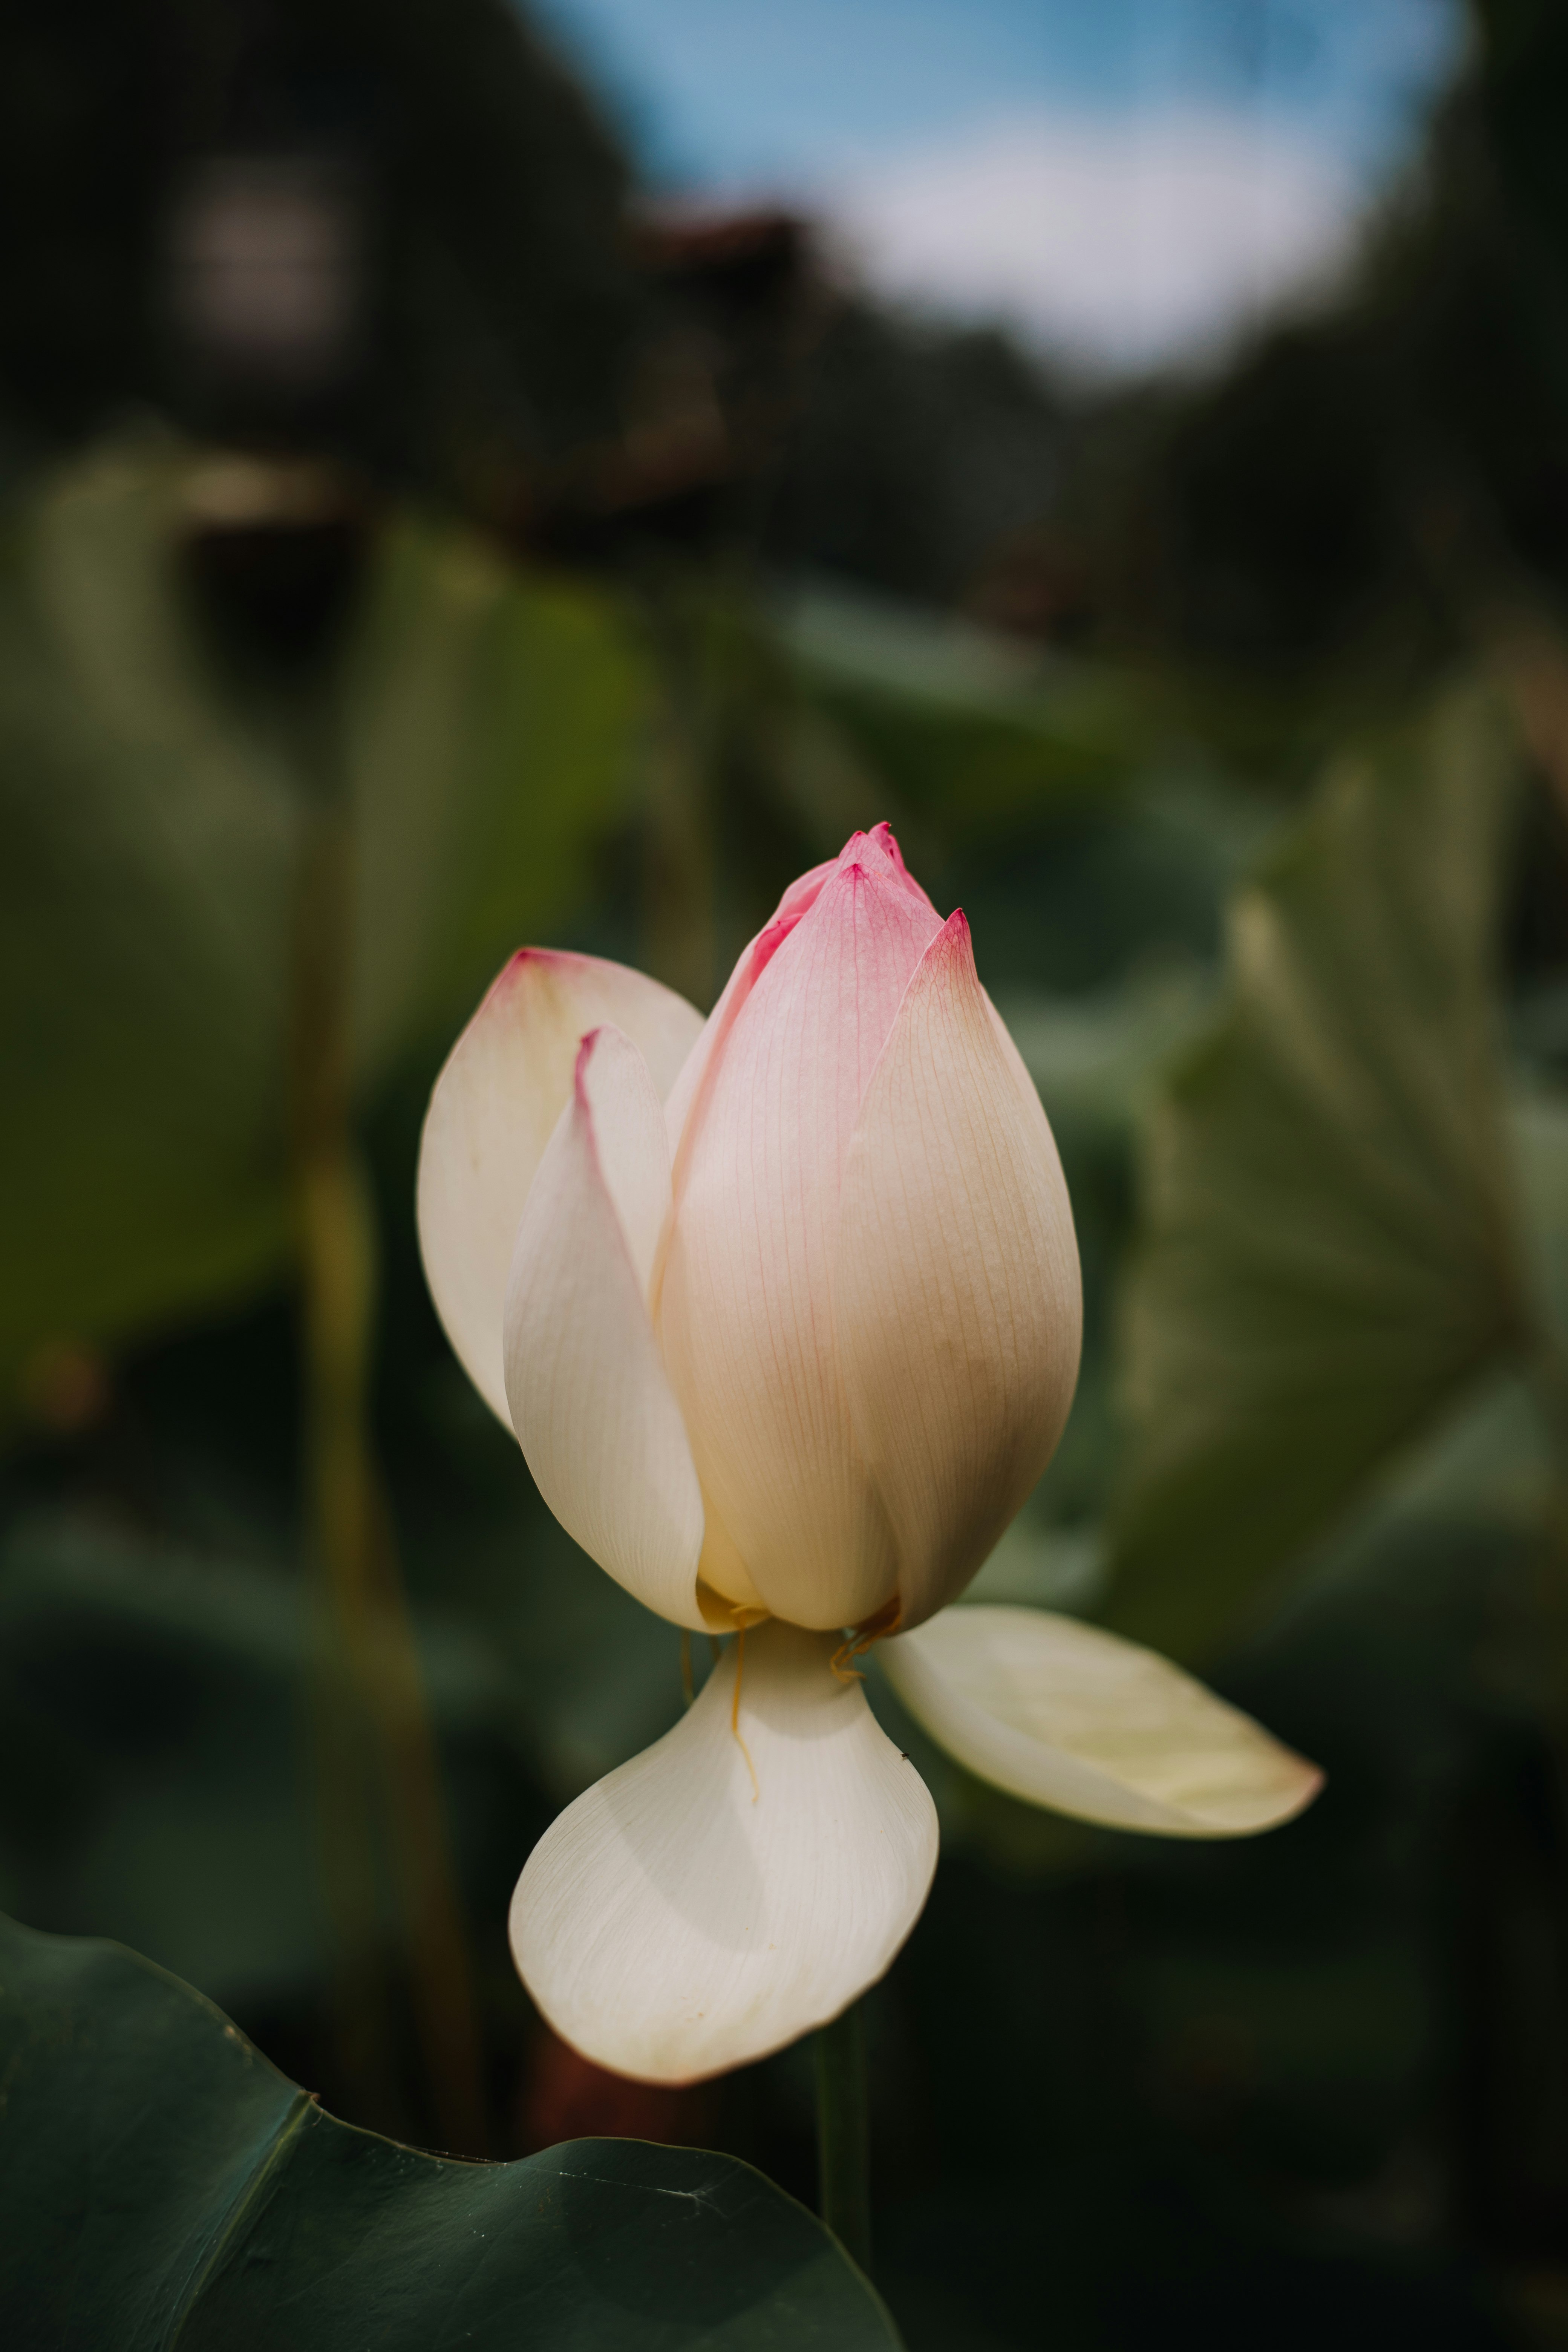 white and pink lotus flower in bloom during daytime